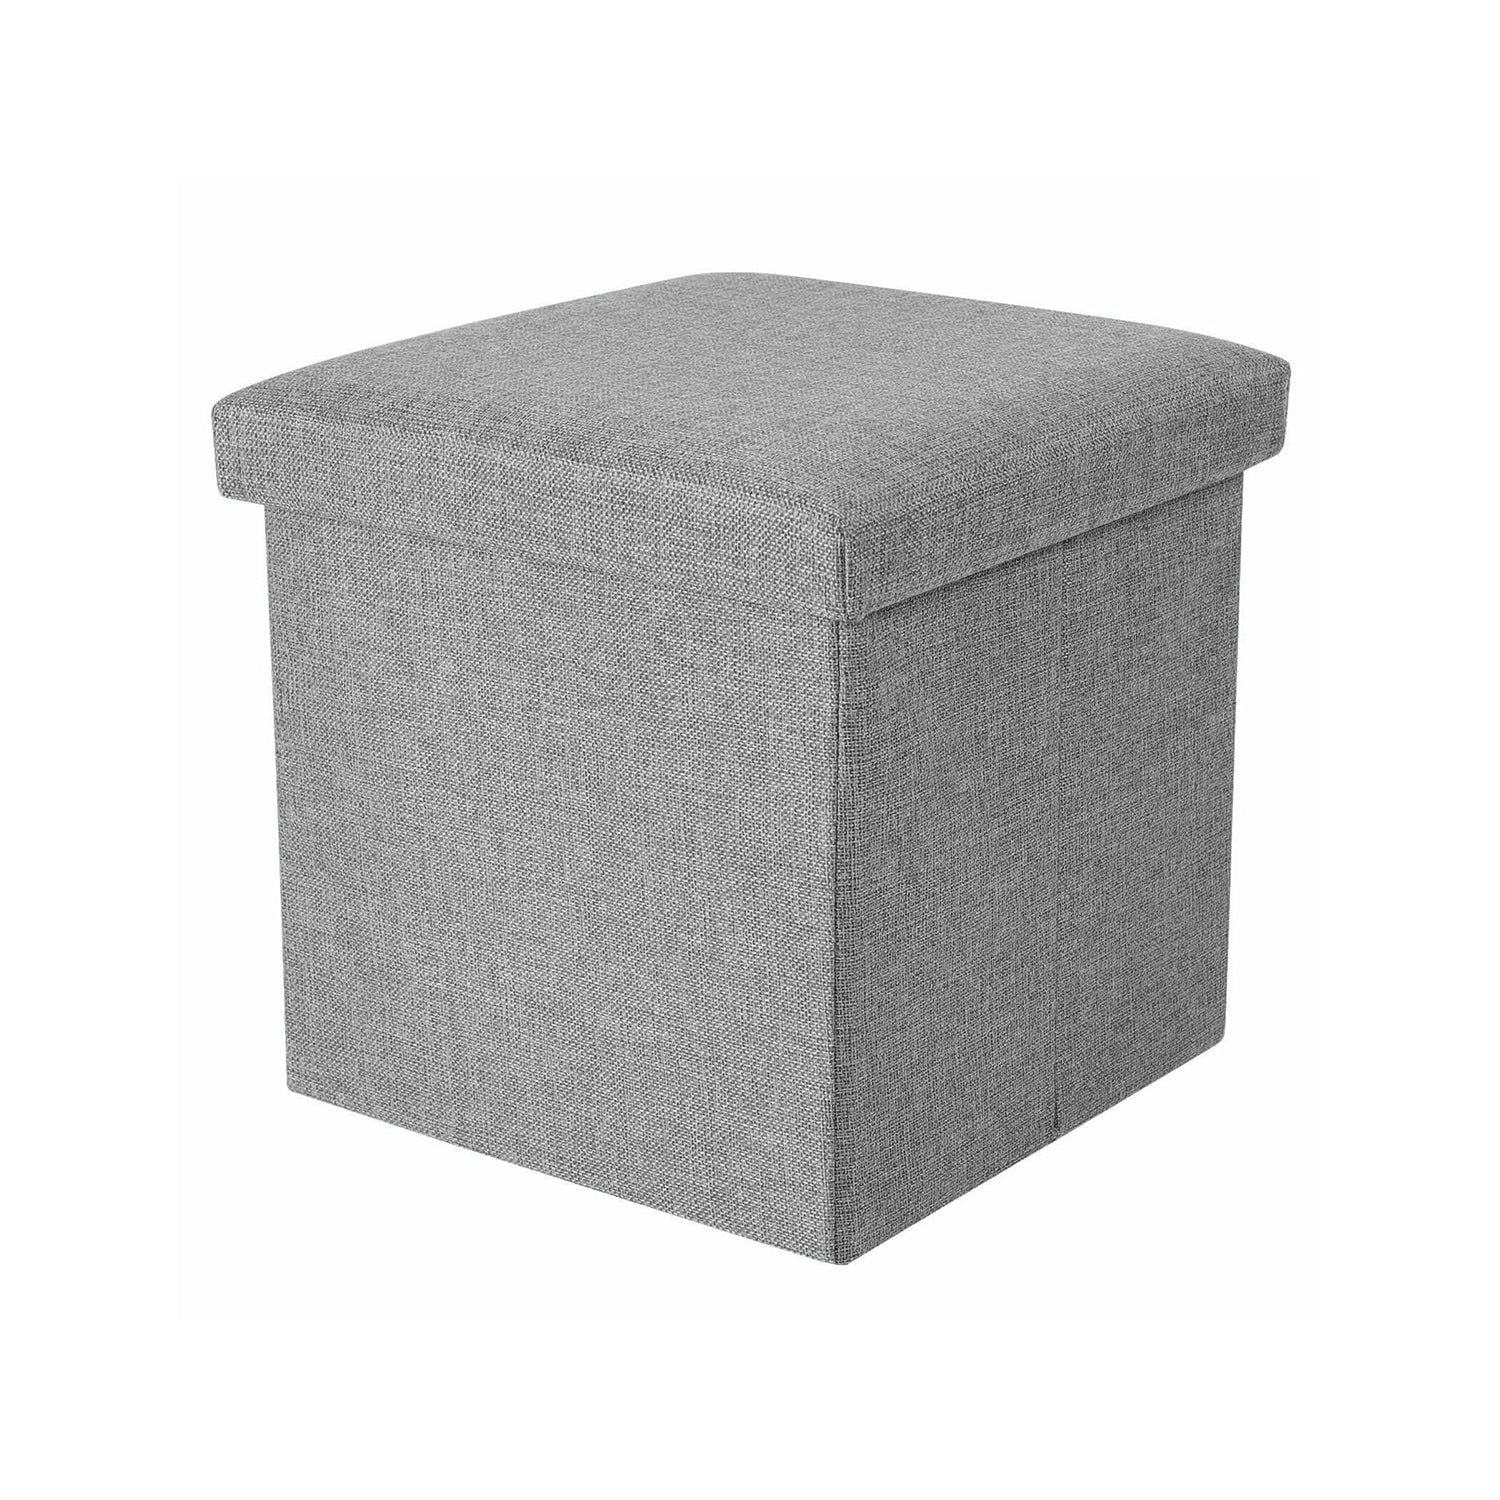 4986 Living Room Cube Shape Sitting Stool with Storage Box. Foldable Storage Bins Multipurpose Clothes, Books, and Toys Organizer with Cushion Seat (multicolor ) DeoDap